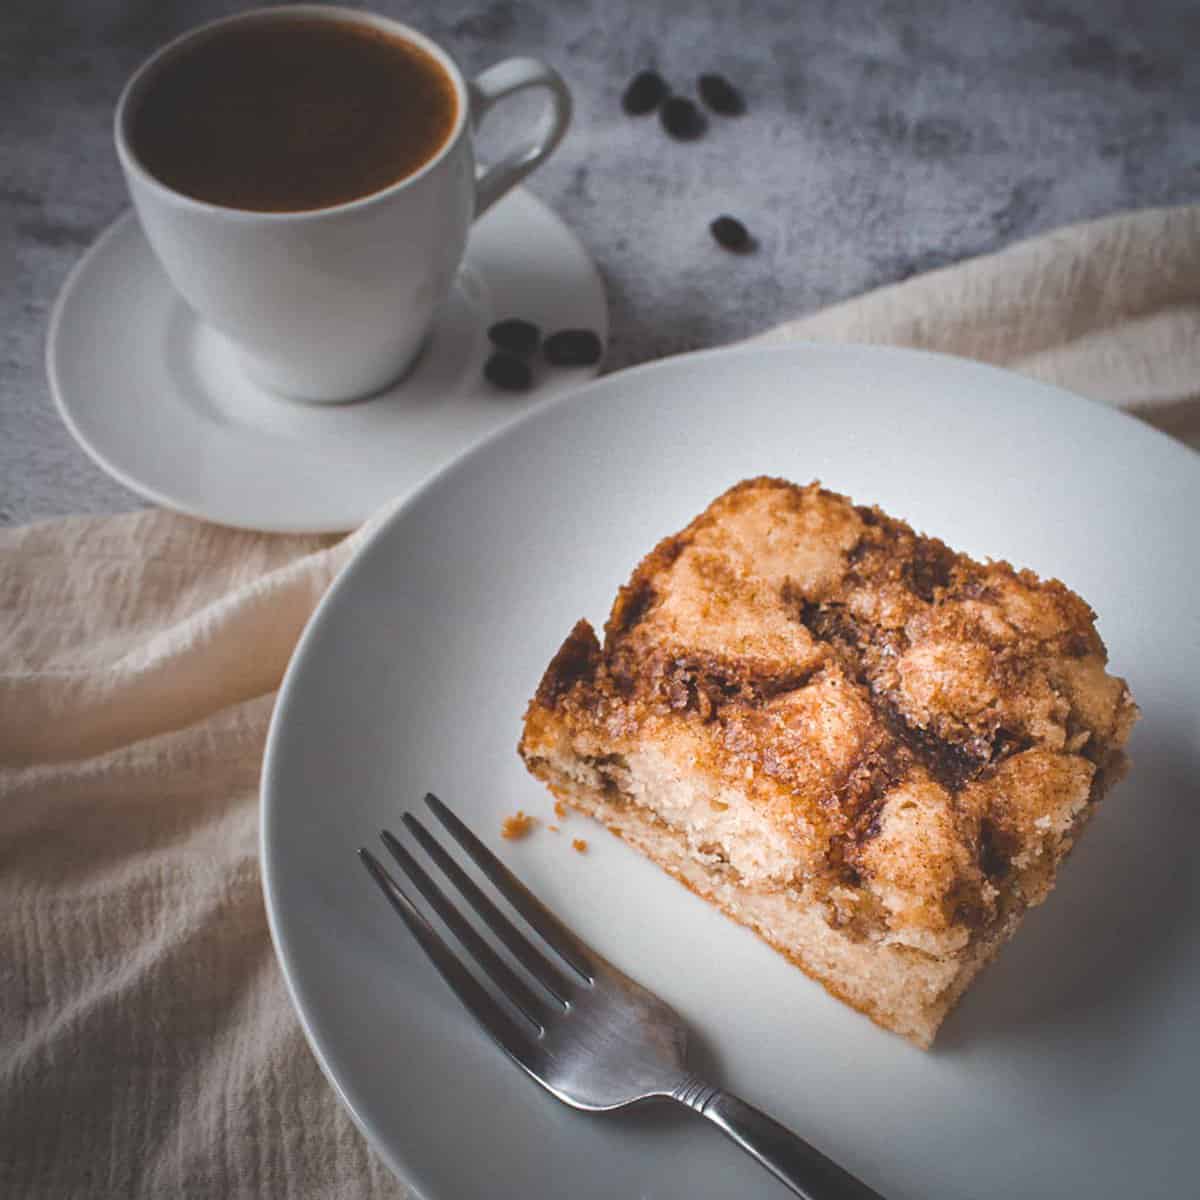 a slice of coffee cake on a plate with a fork and a cup of coffee on the side